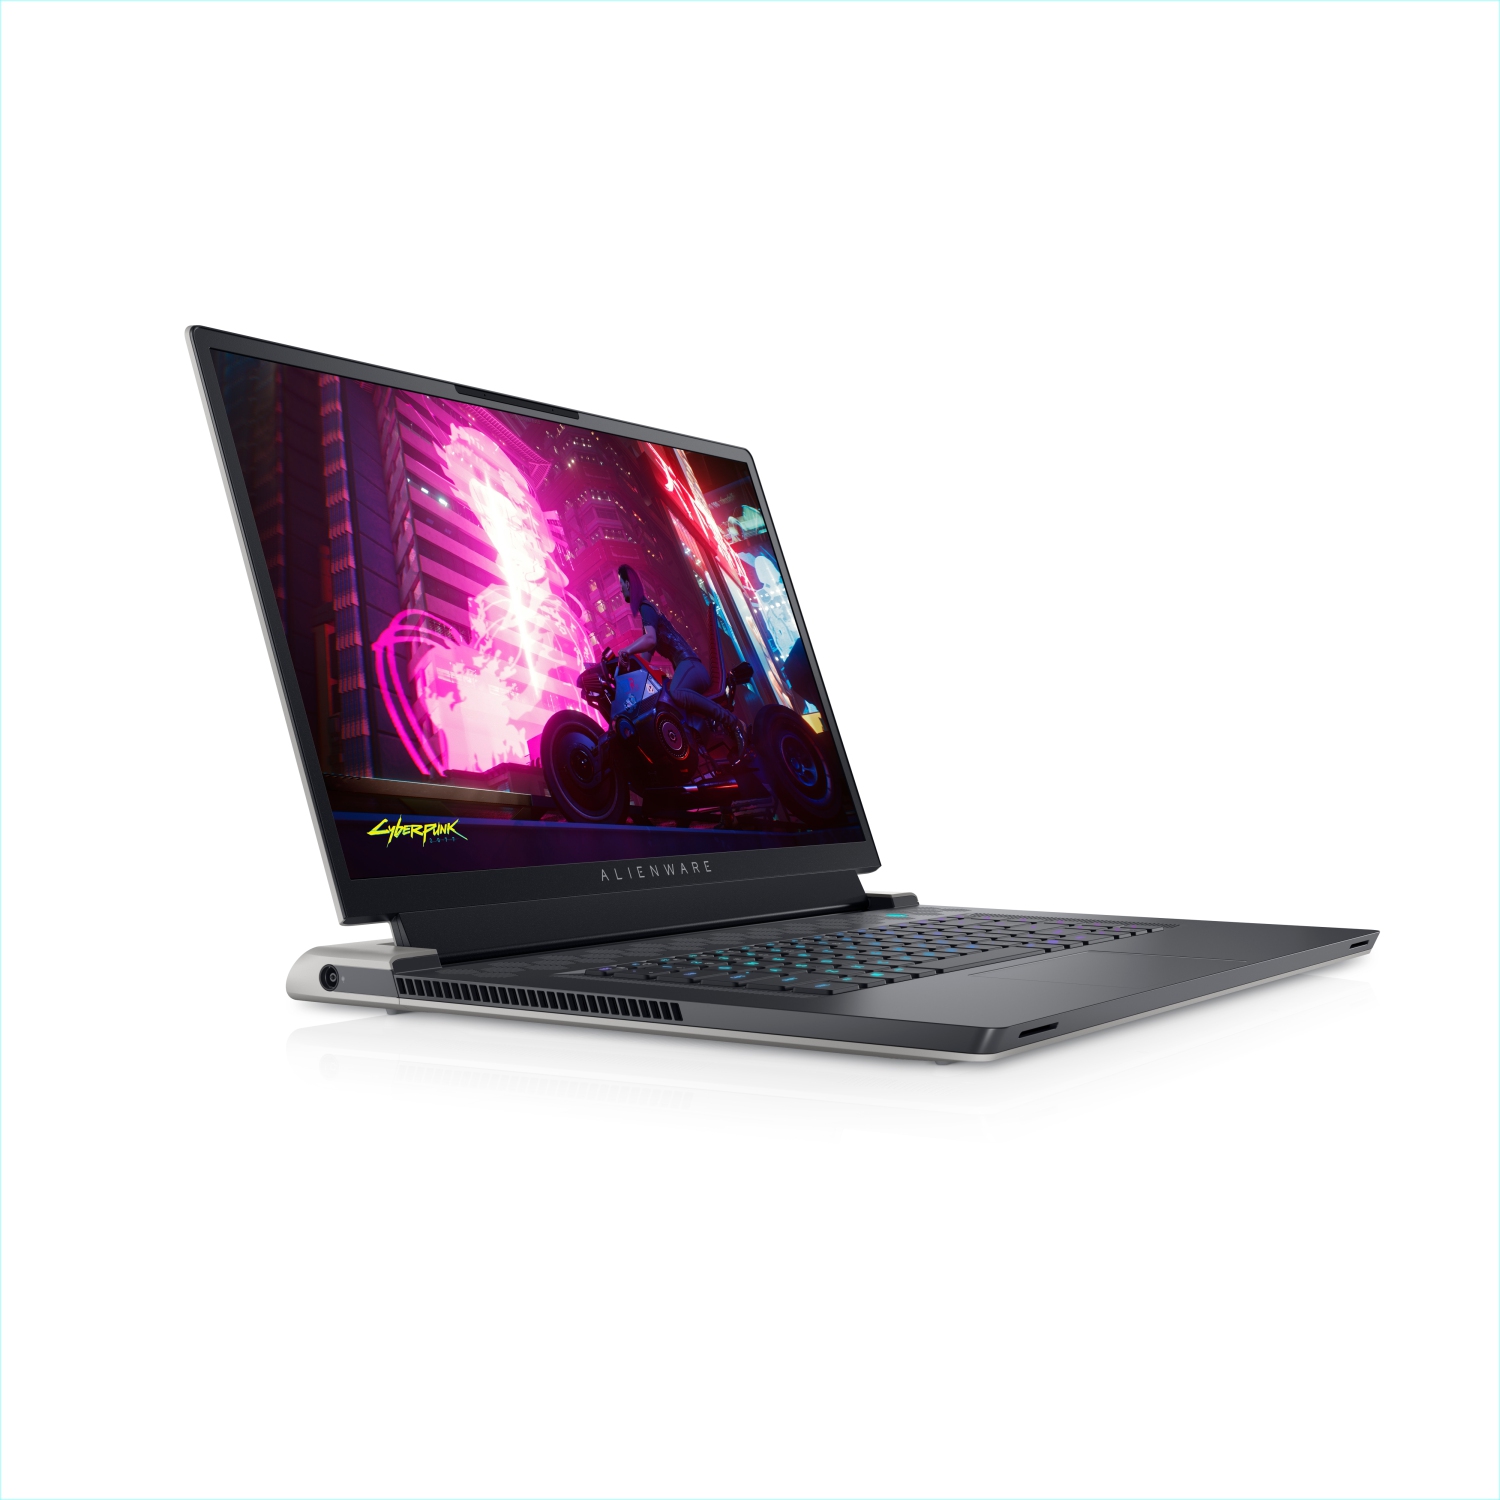 Refurbished (Excellent) - Dell Alienware X17 R1 Gaming Laptop (2021), 17.3" 4K, Core i7, 1TB SSD, 32GB RAM, RTX 3060, 8 Cores @ 4.6 GHz, 11th Gen CPU Certified